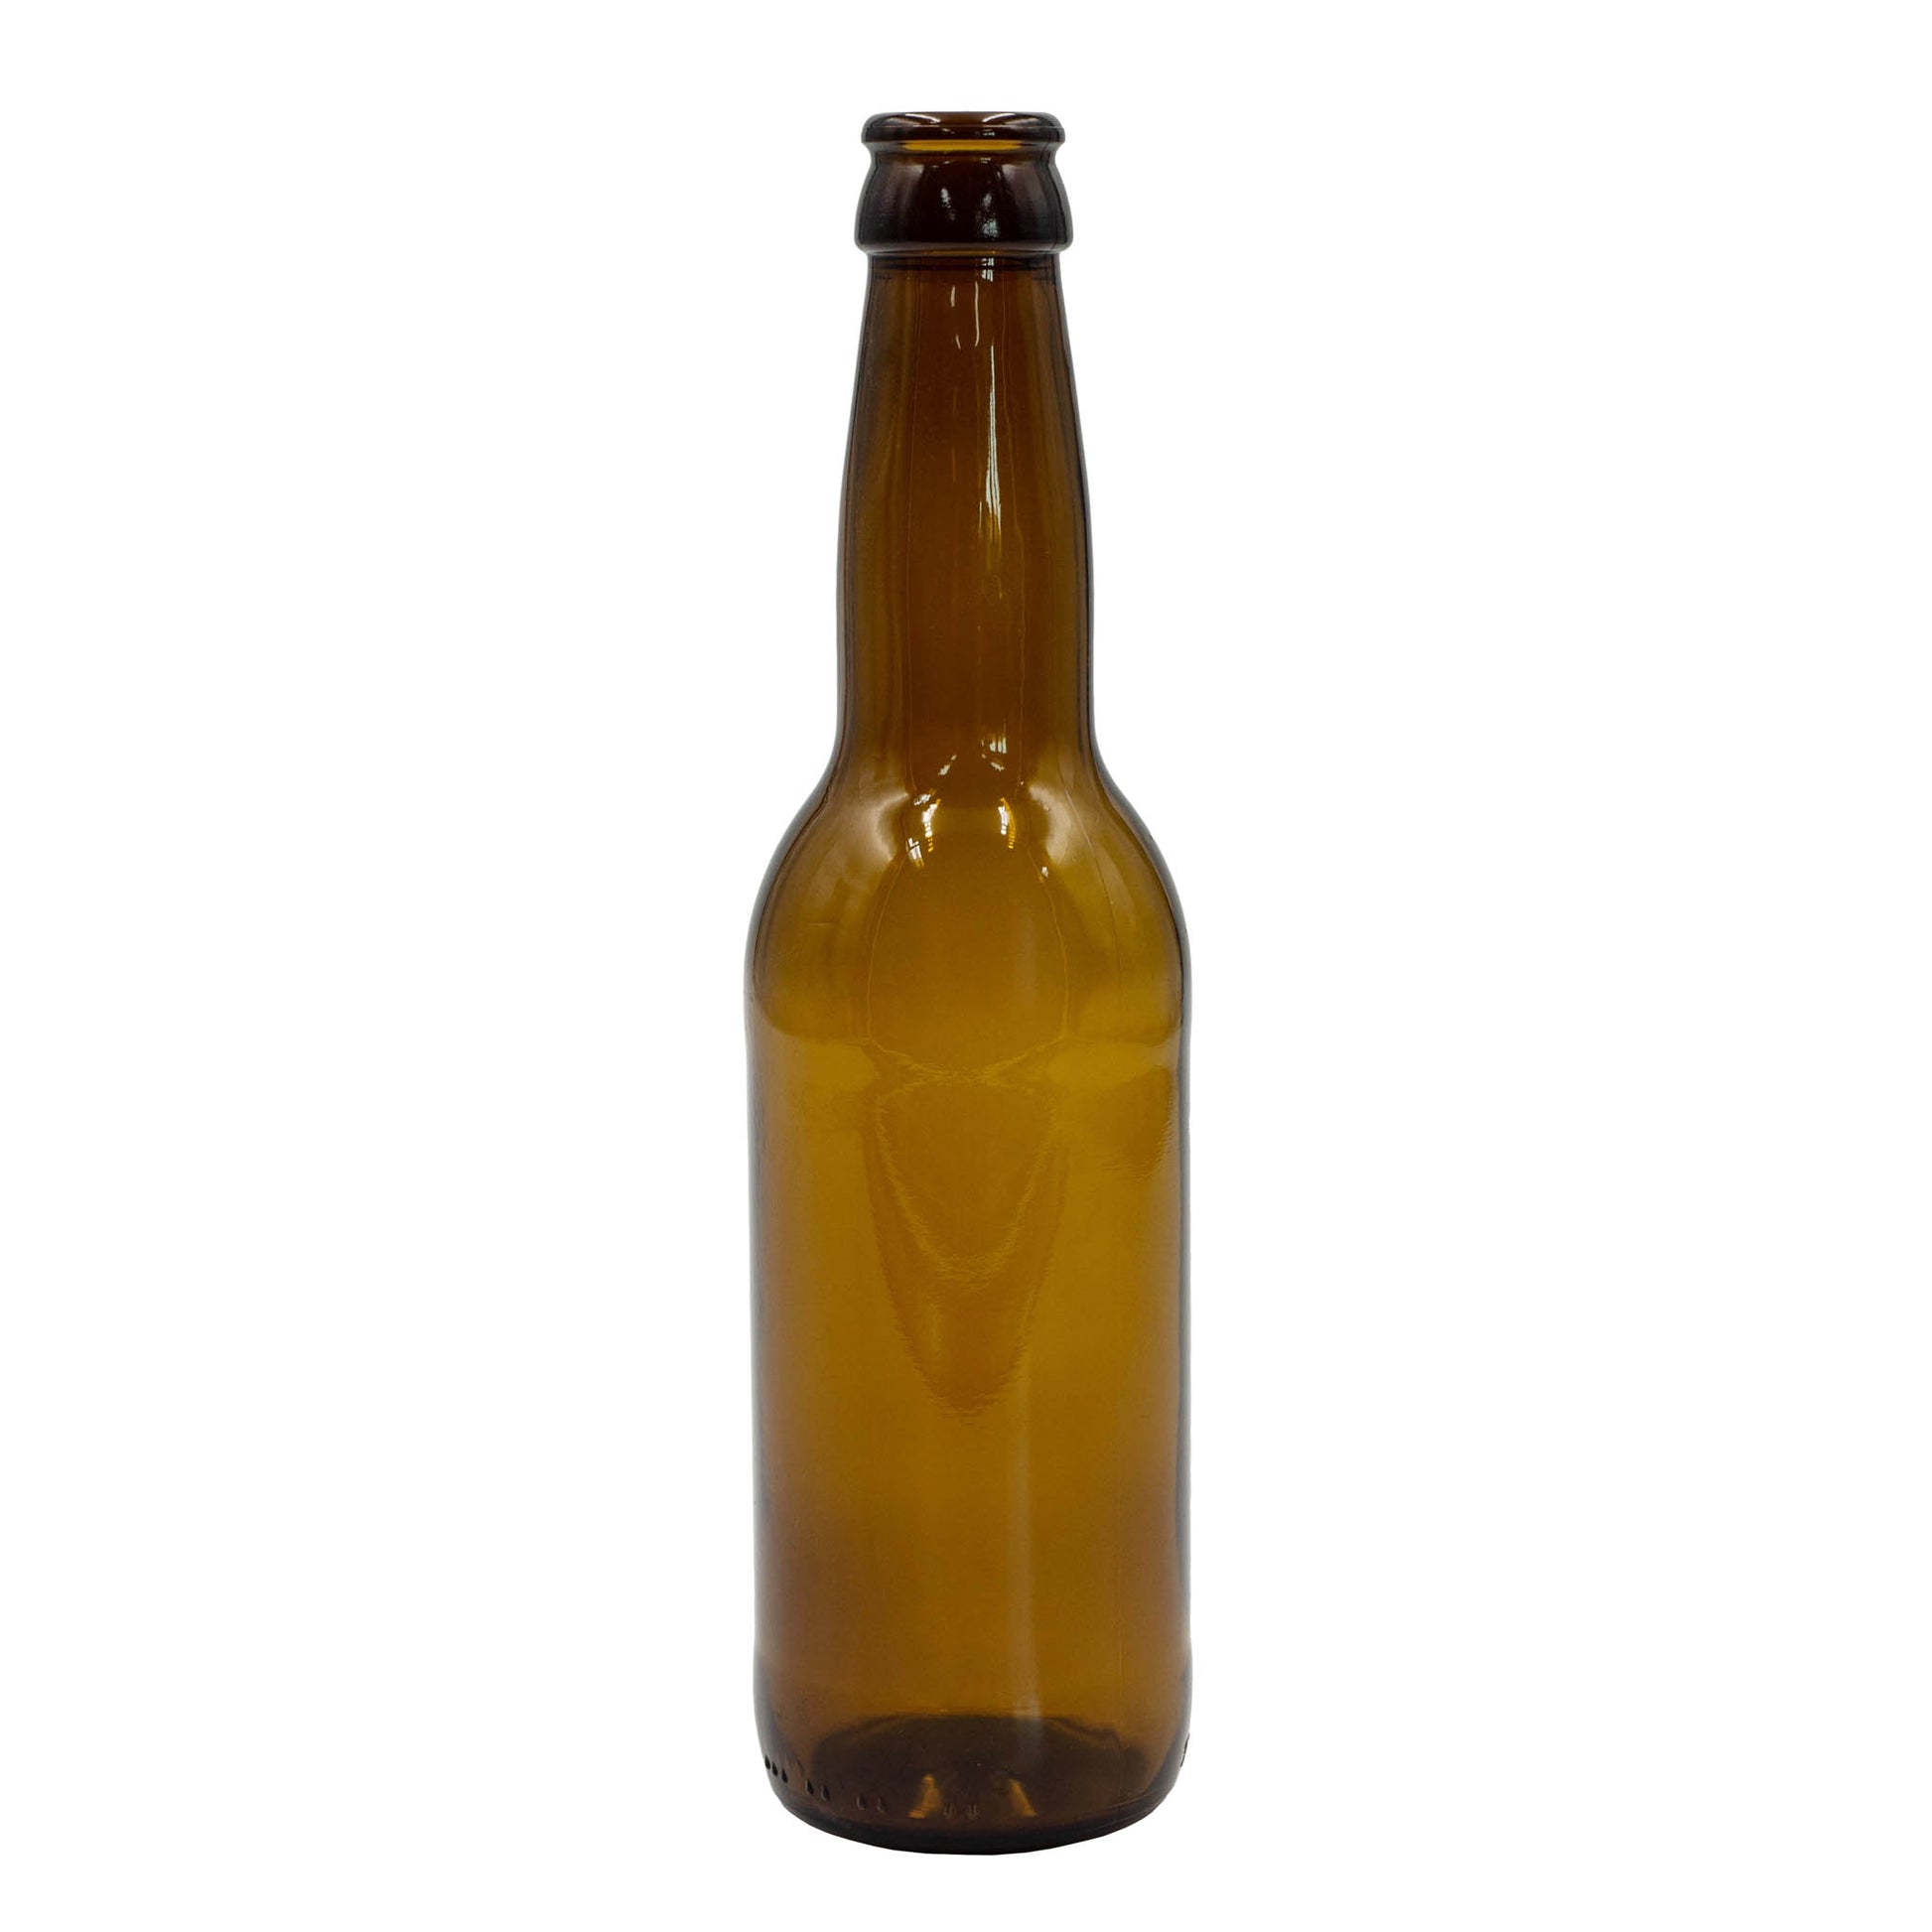 330 ml beer bottle made with amber glass